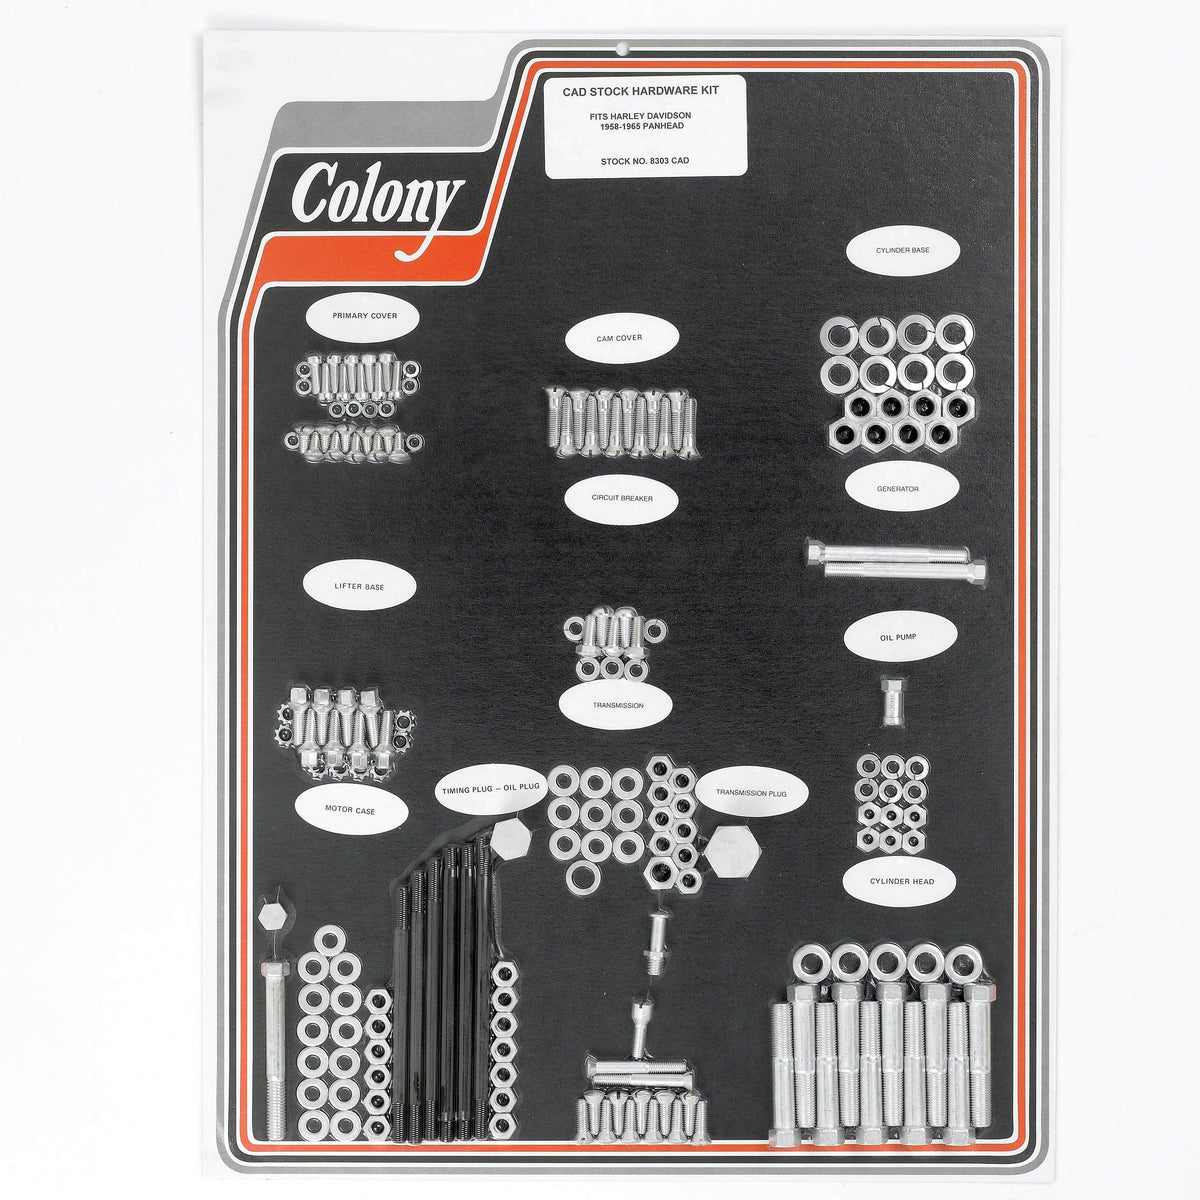 Colony Machine #8303 CAD Complete Stock Hardware Kit - 1958-1965